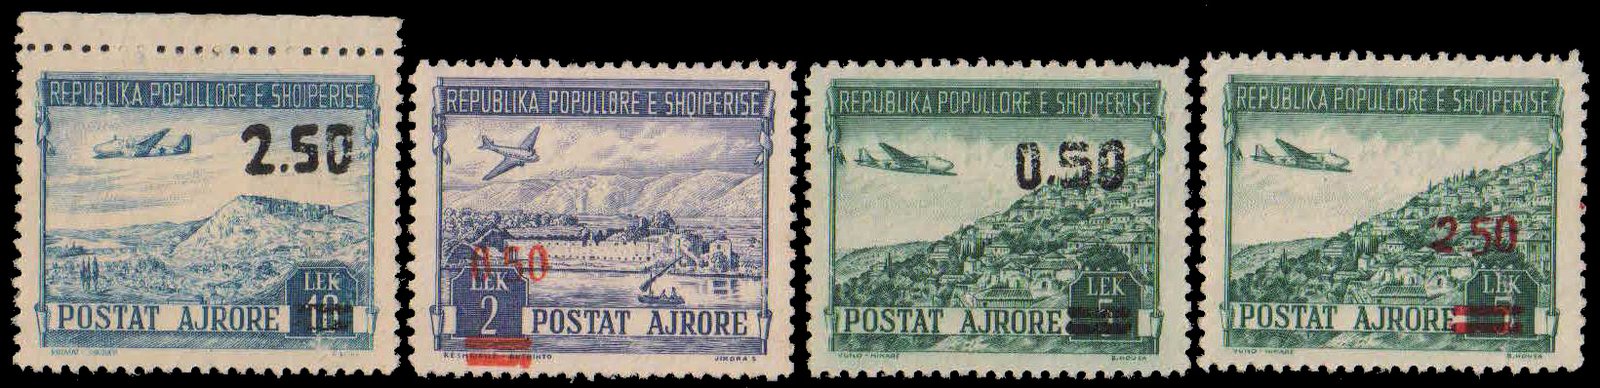 ALBANIA 1952-Aeroplane, Vuno Himare, Surcharged Issue, Set of 4, Mint Gum Wash, S.G. 571-74-Cat £ 735